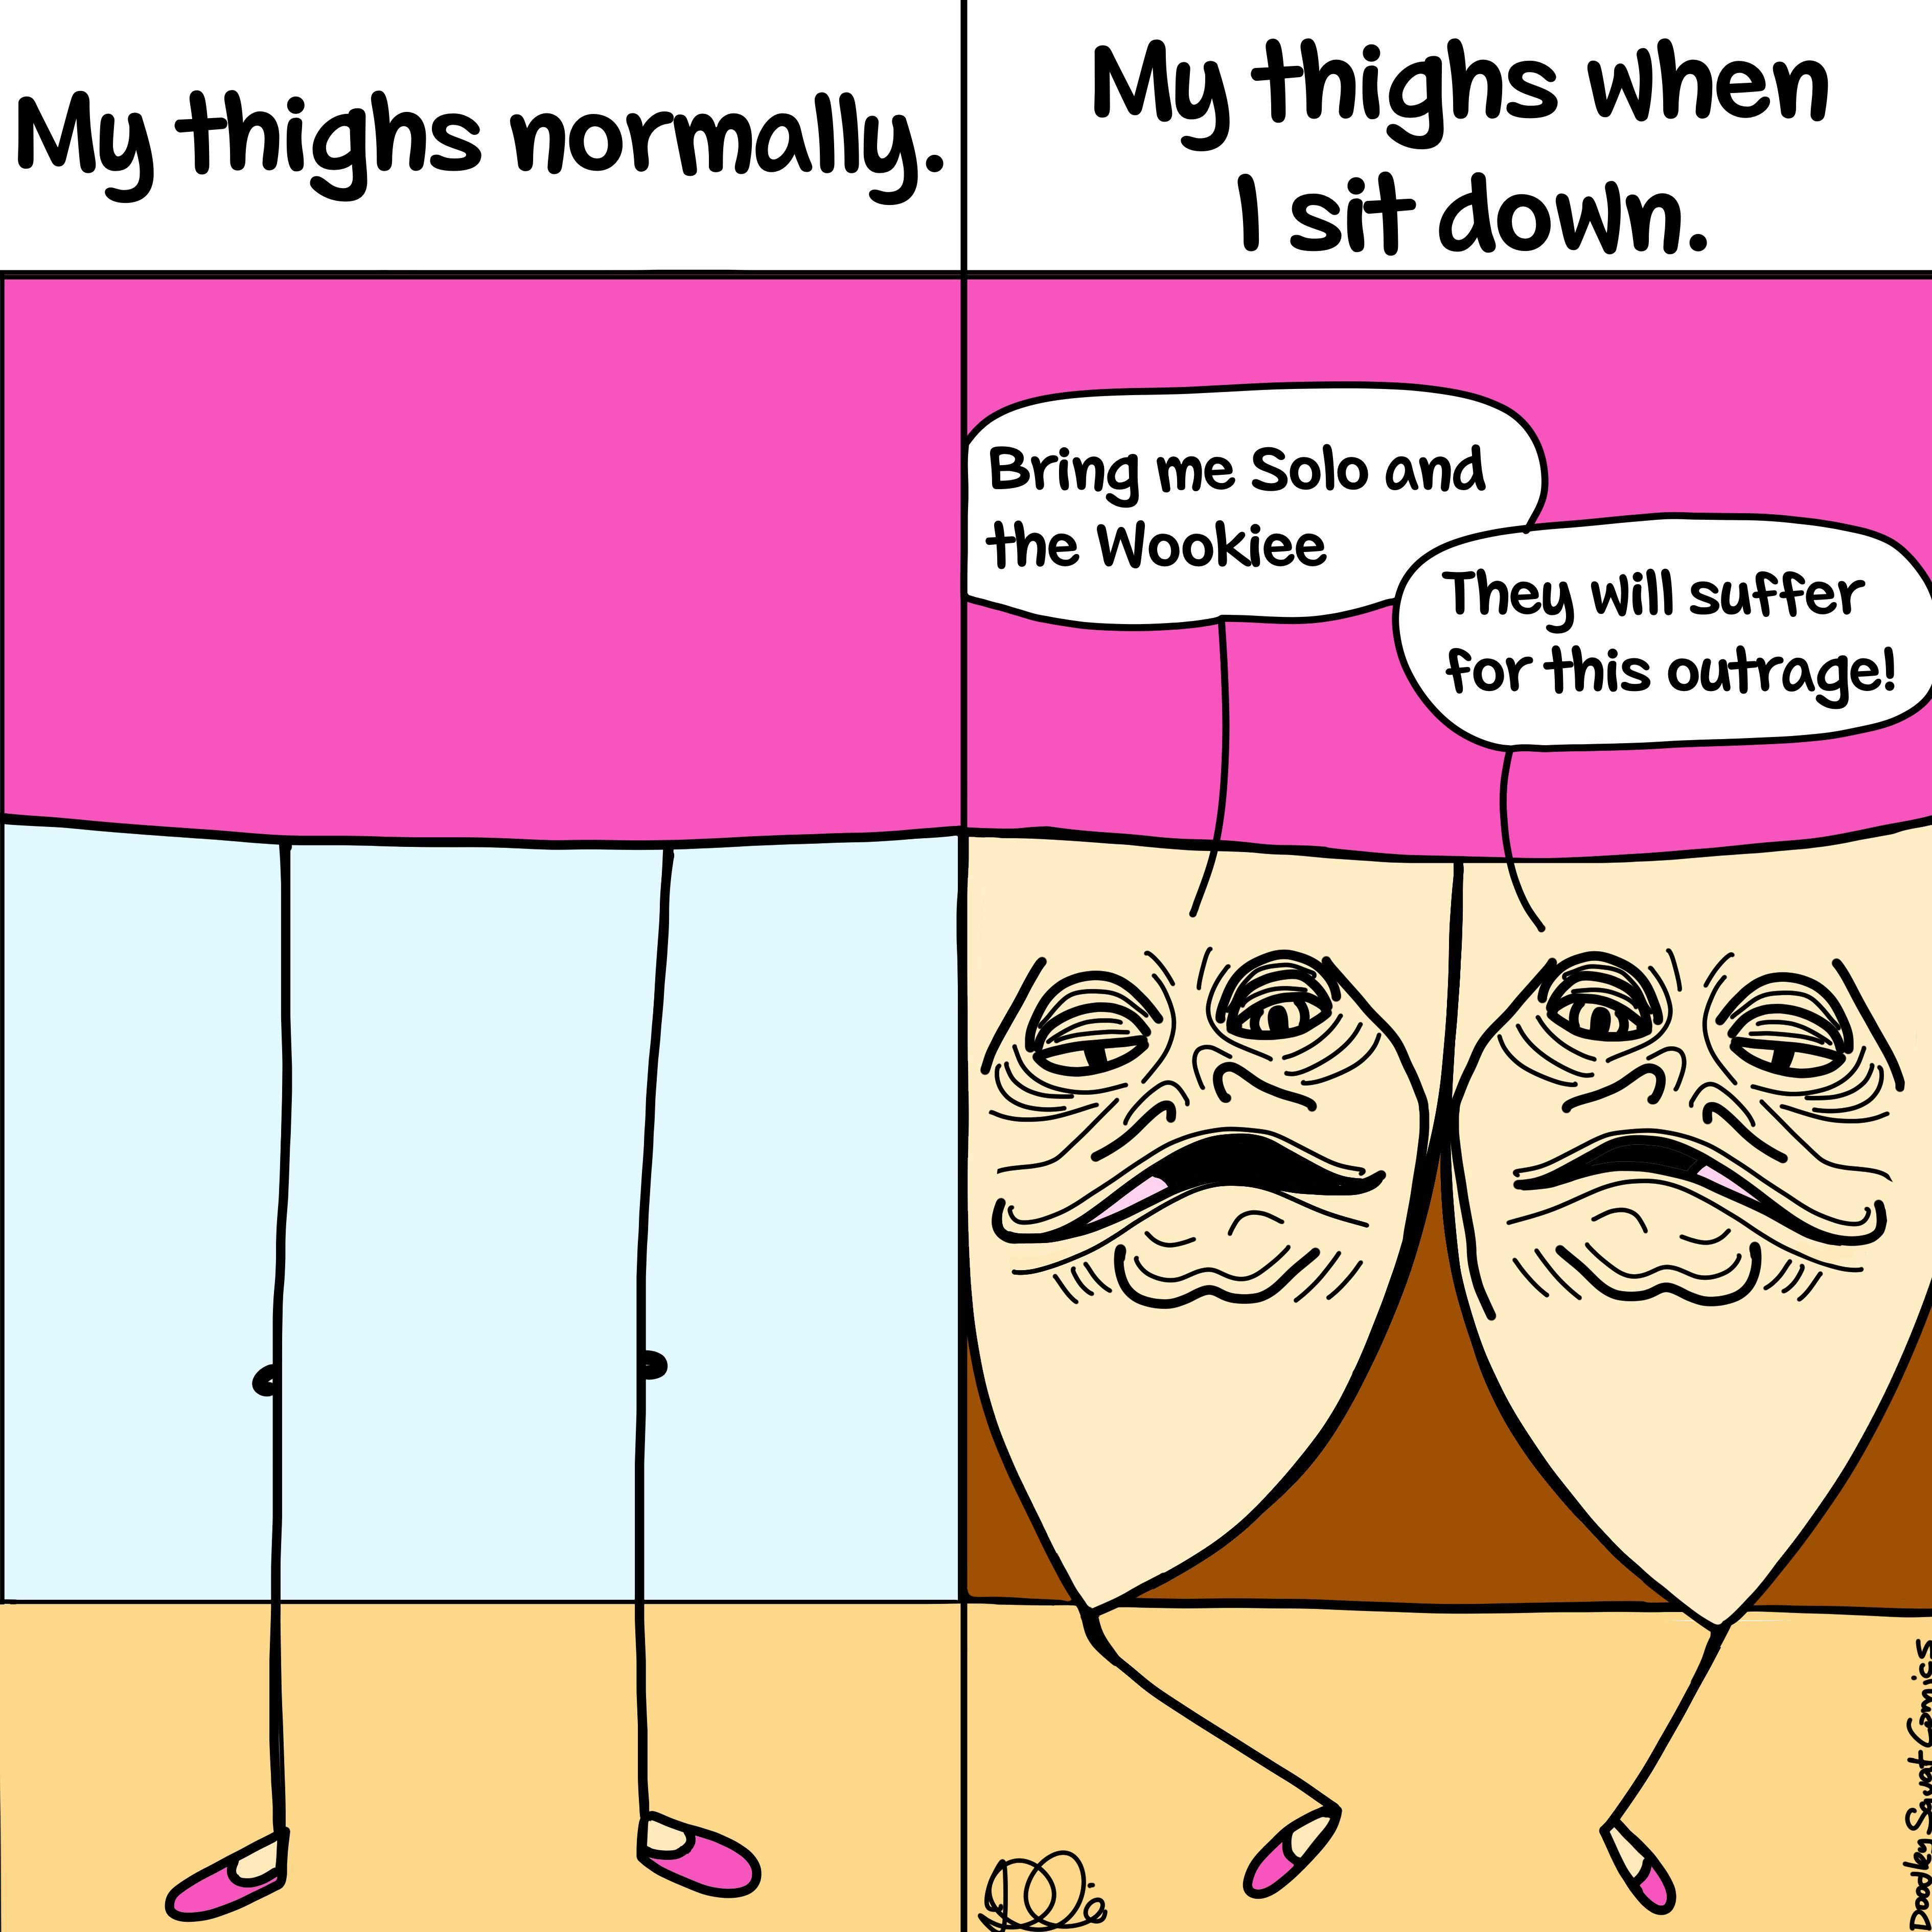 Why, thighs? Why?